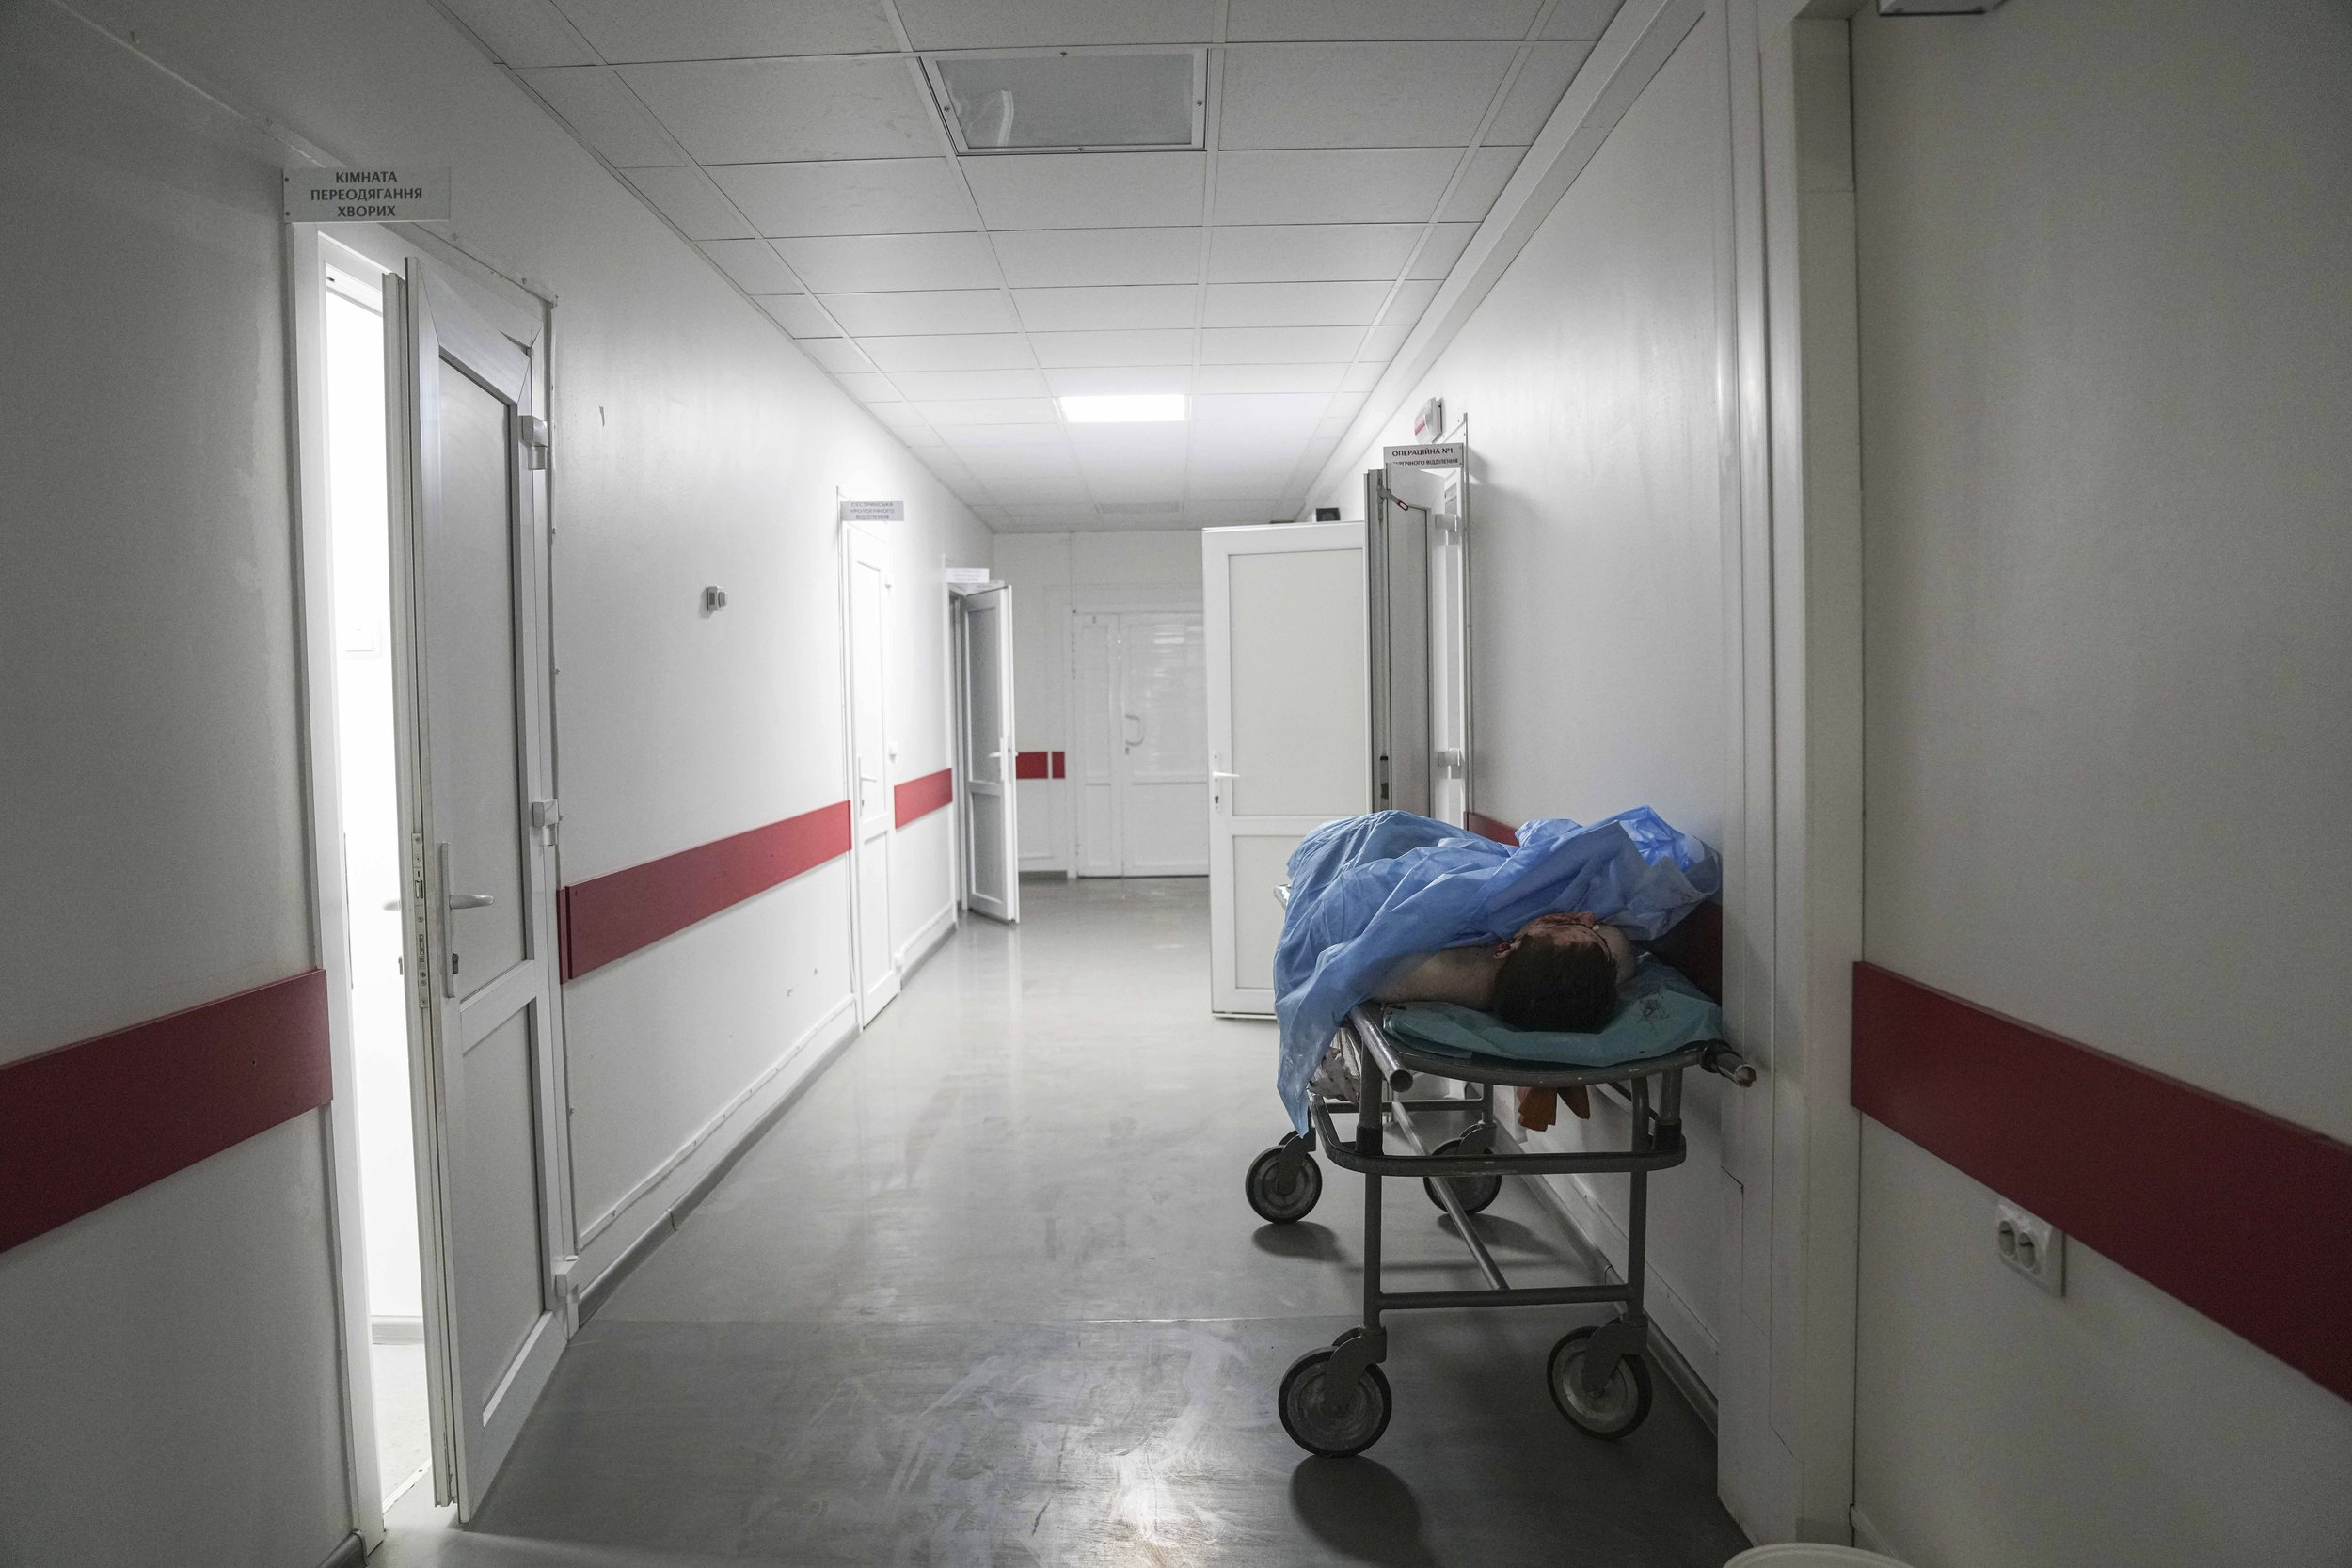  The dead body of a victim from shelling in a residential area lies on a stretcher in a corridor in a maternity hospital converted into a medical ward in Mariupol, Ukraine, Tuesday, March 1, 2022. (AP Photo/Evgeniy Maloletka) 